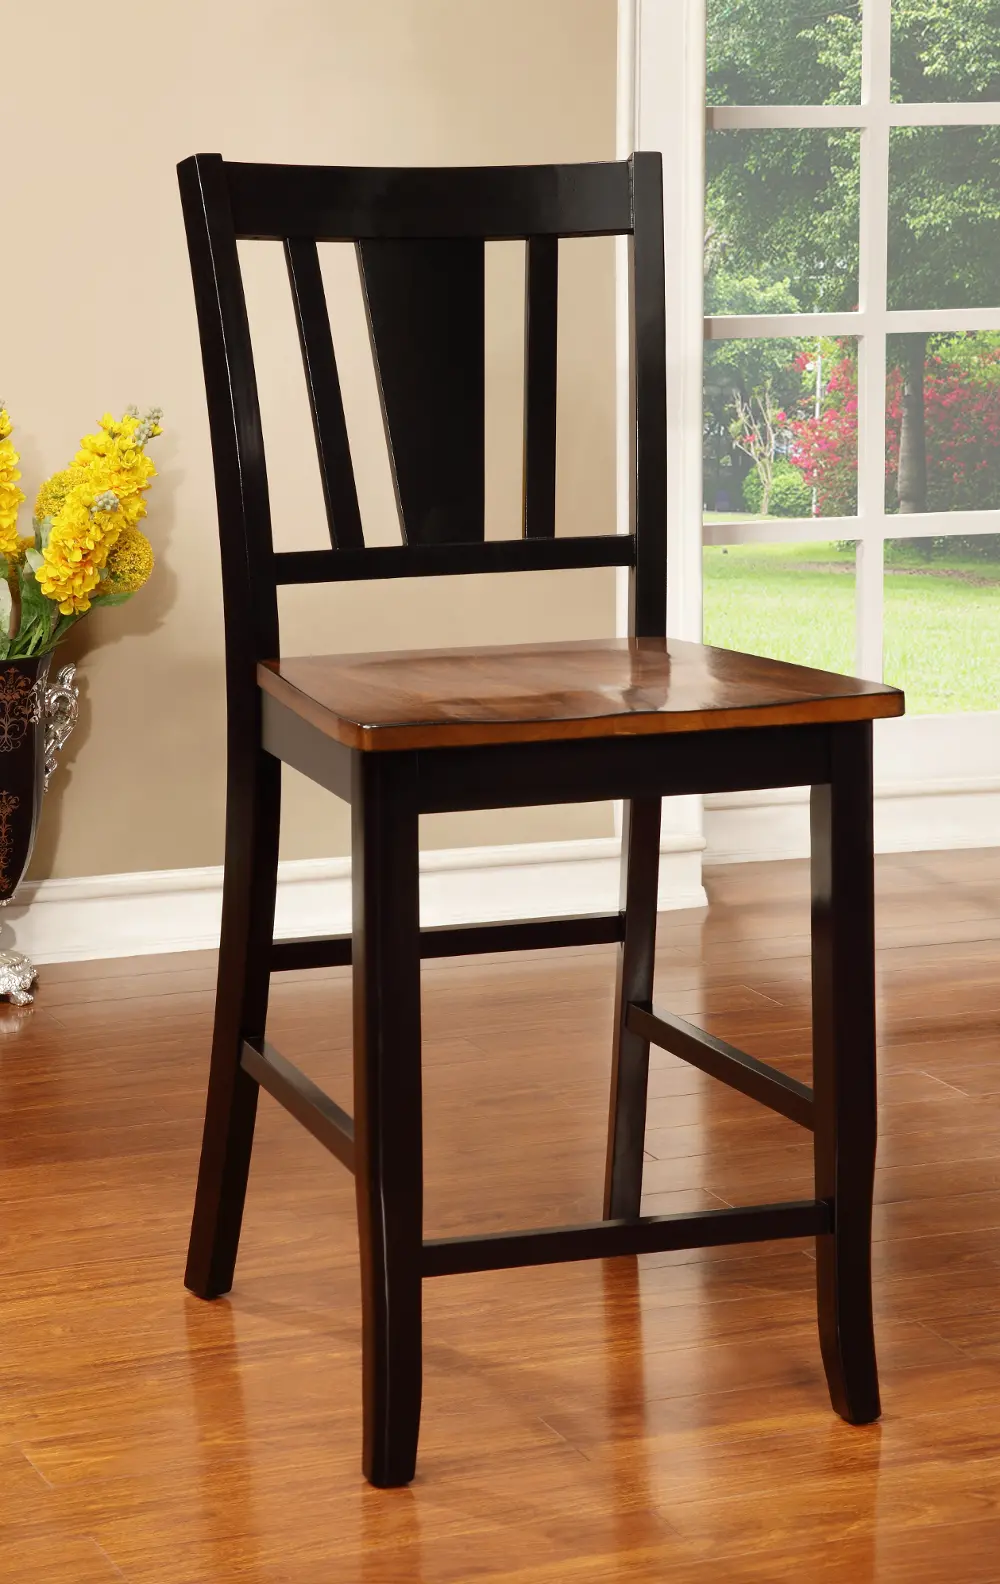 Black & Cherry Counter Height Stool - Dover-1